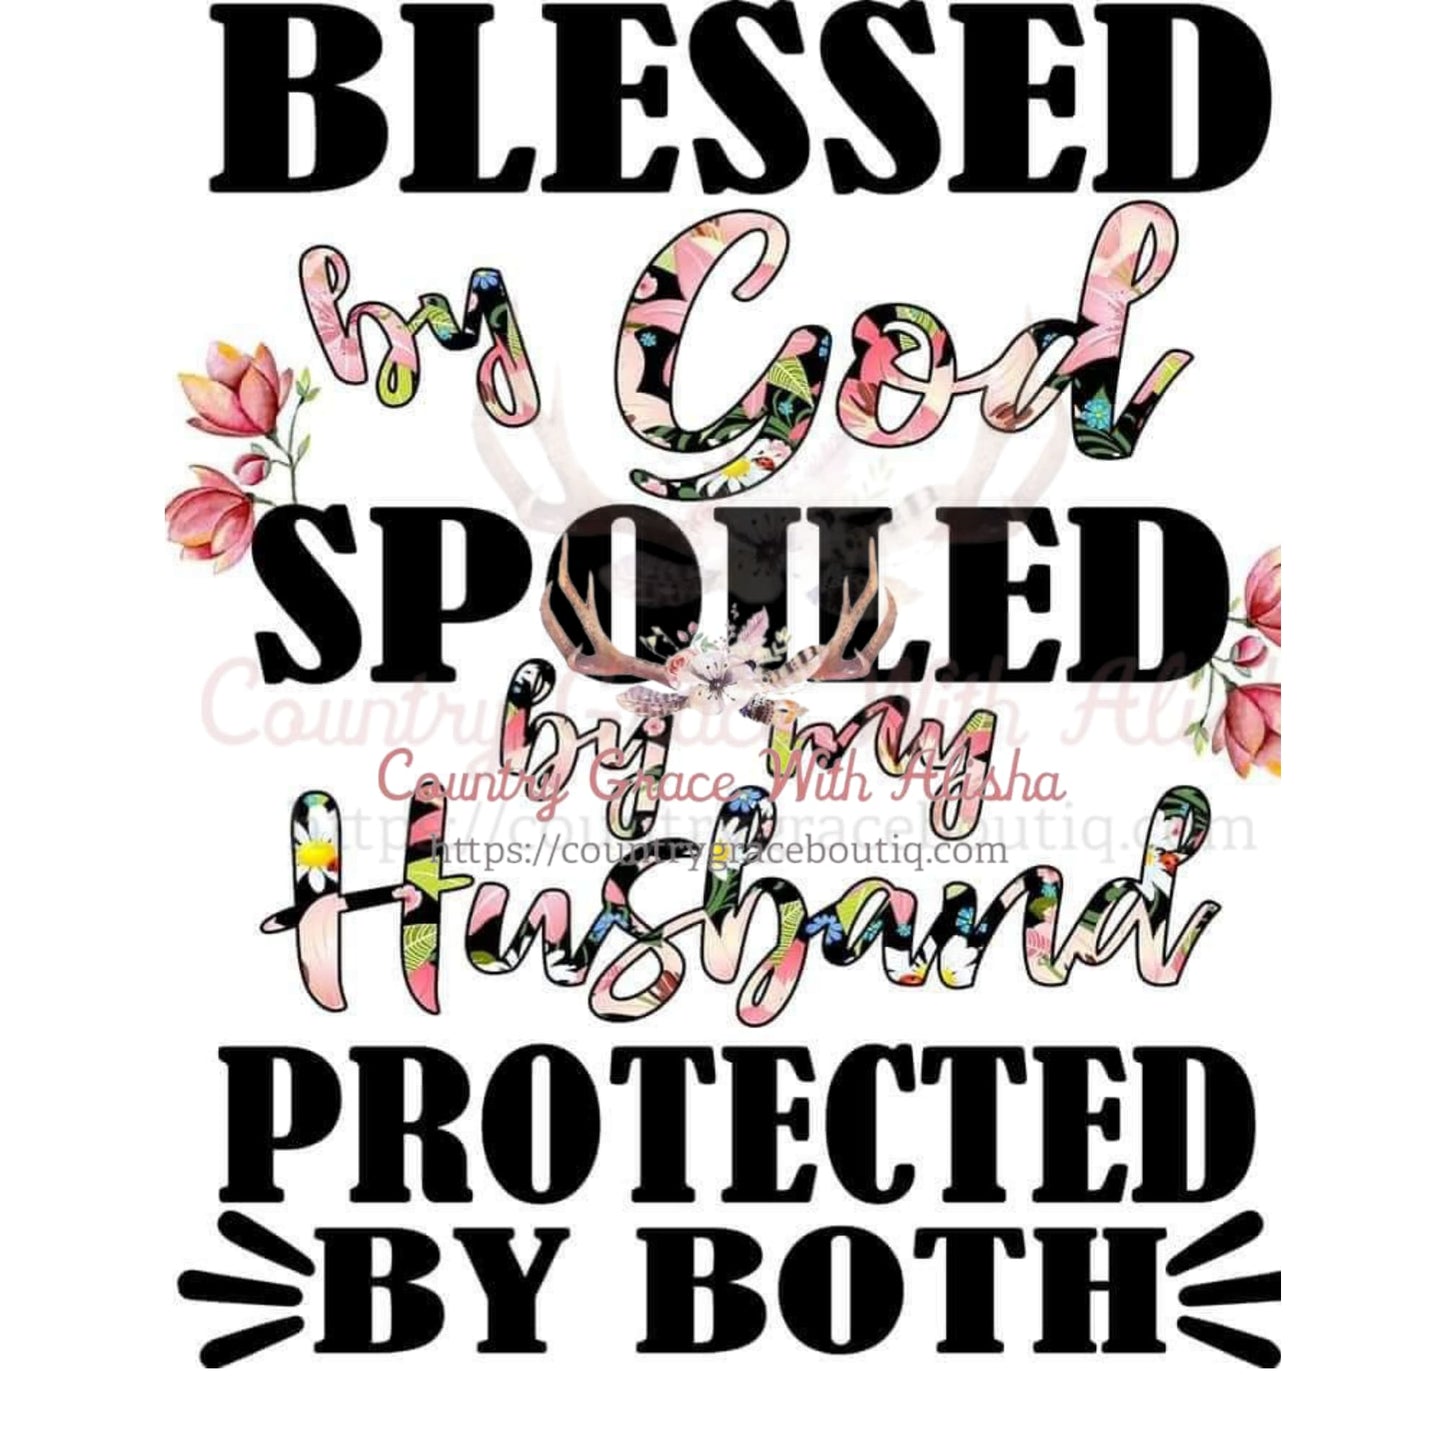 Blessed By God Sublimation Transfer - Sub $1.50 Country 